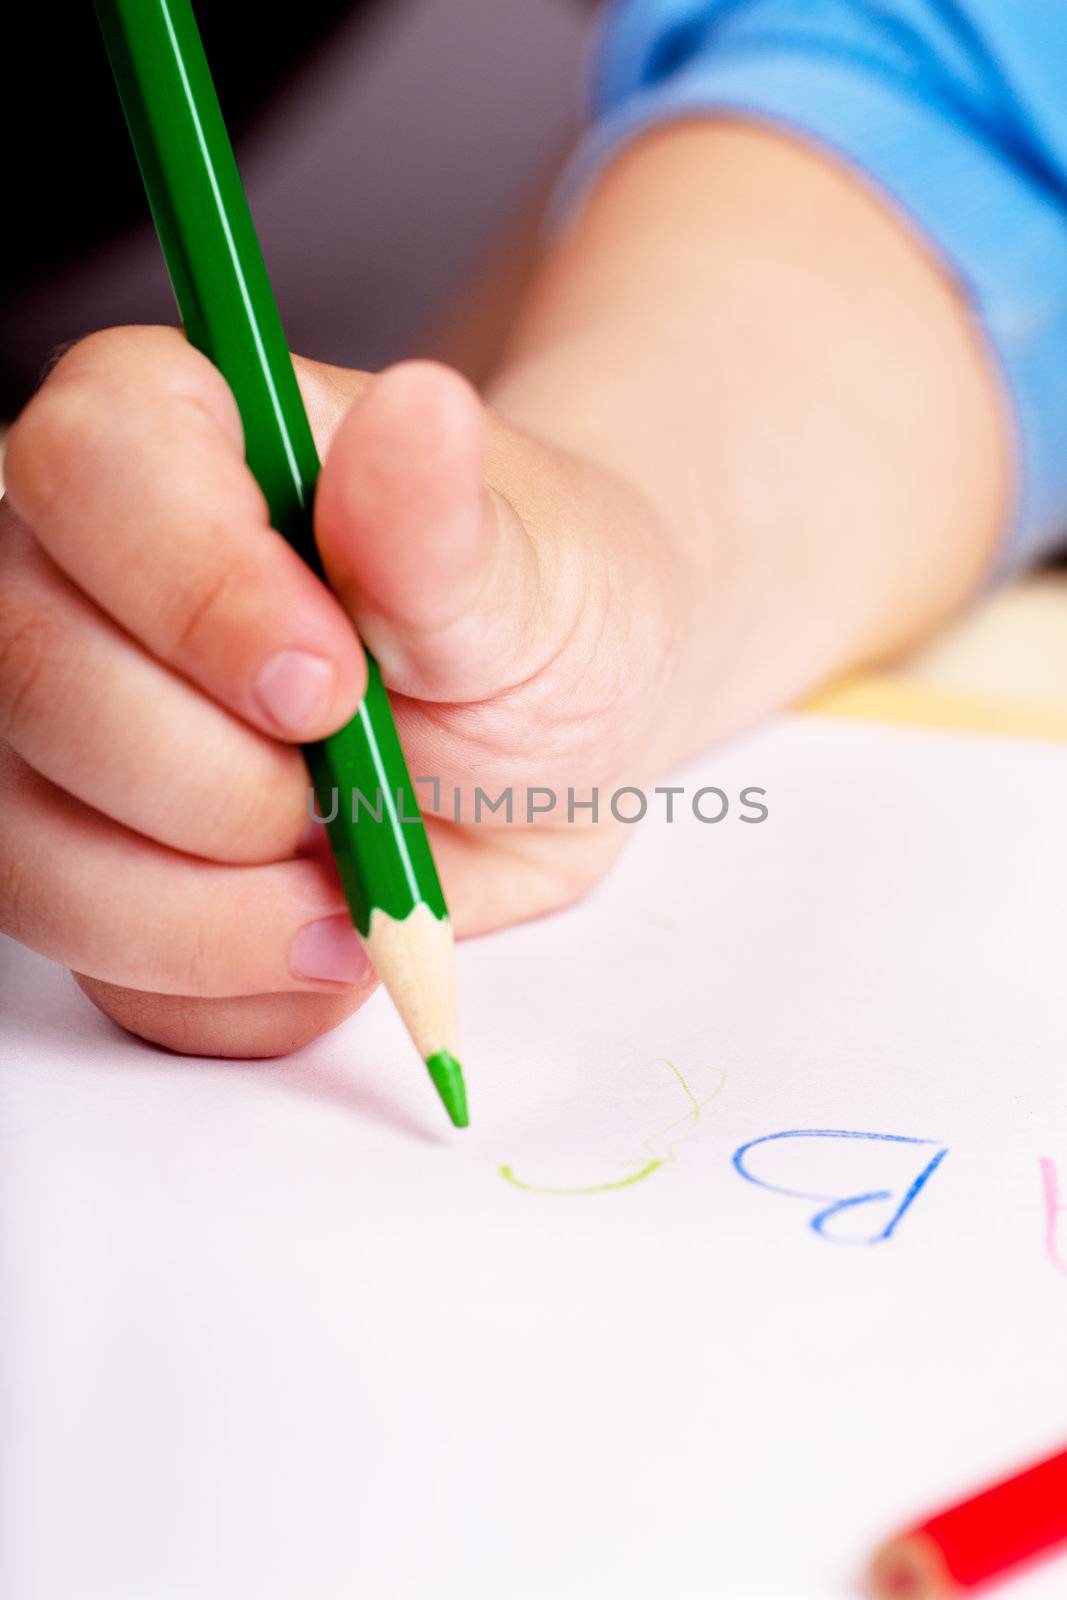 Child's hand writing letters with green pen